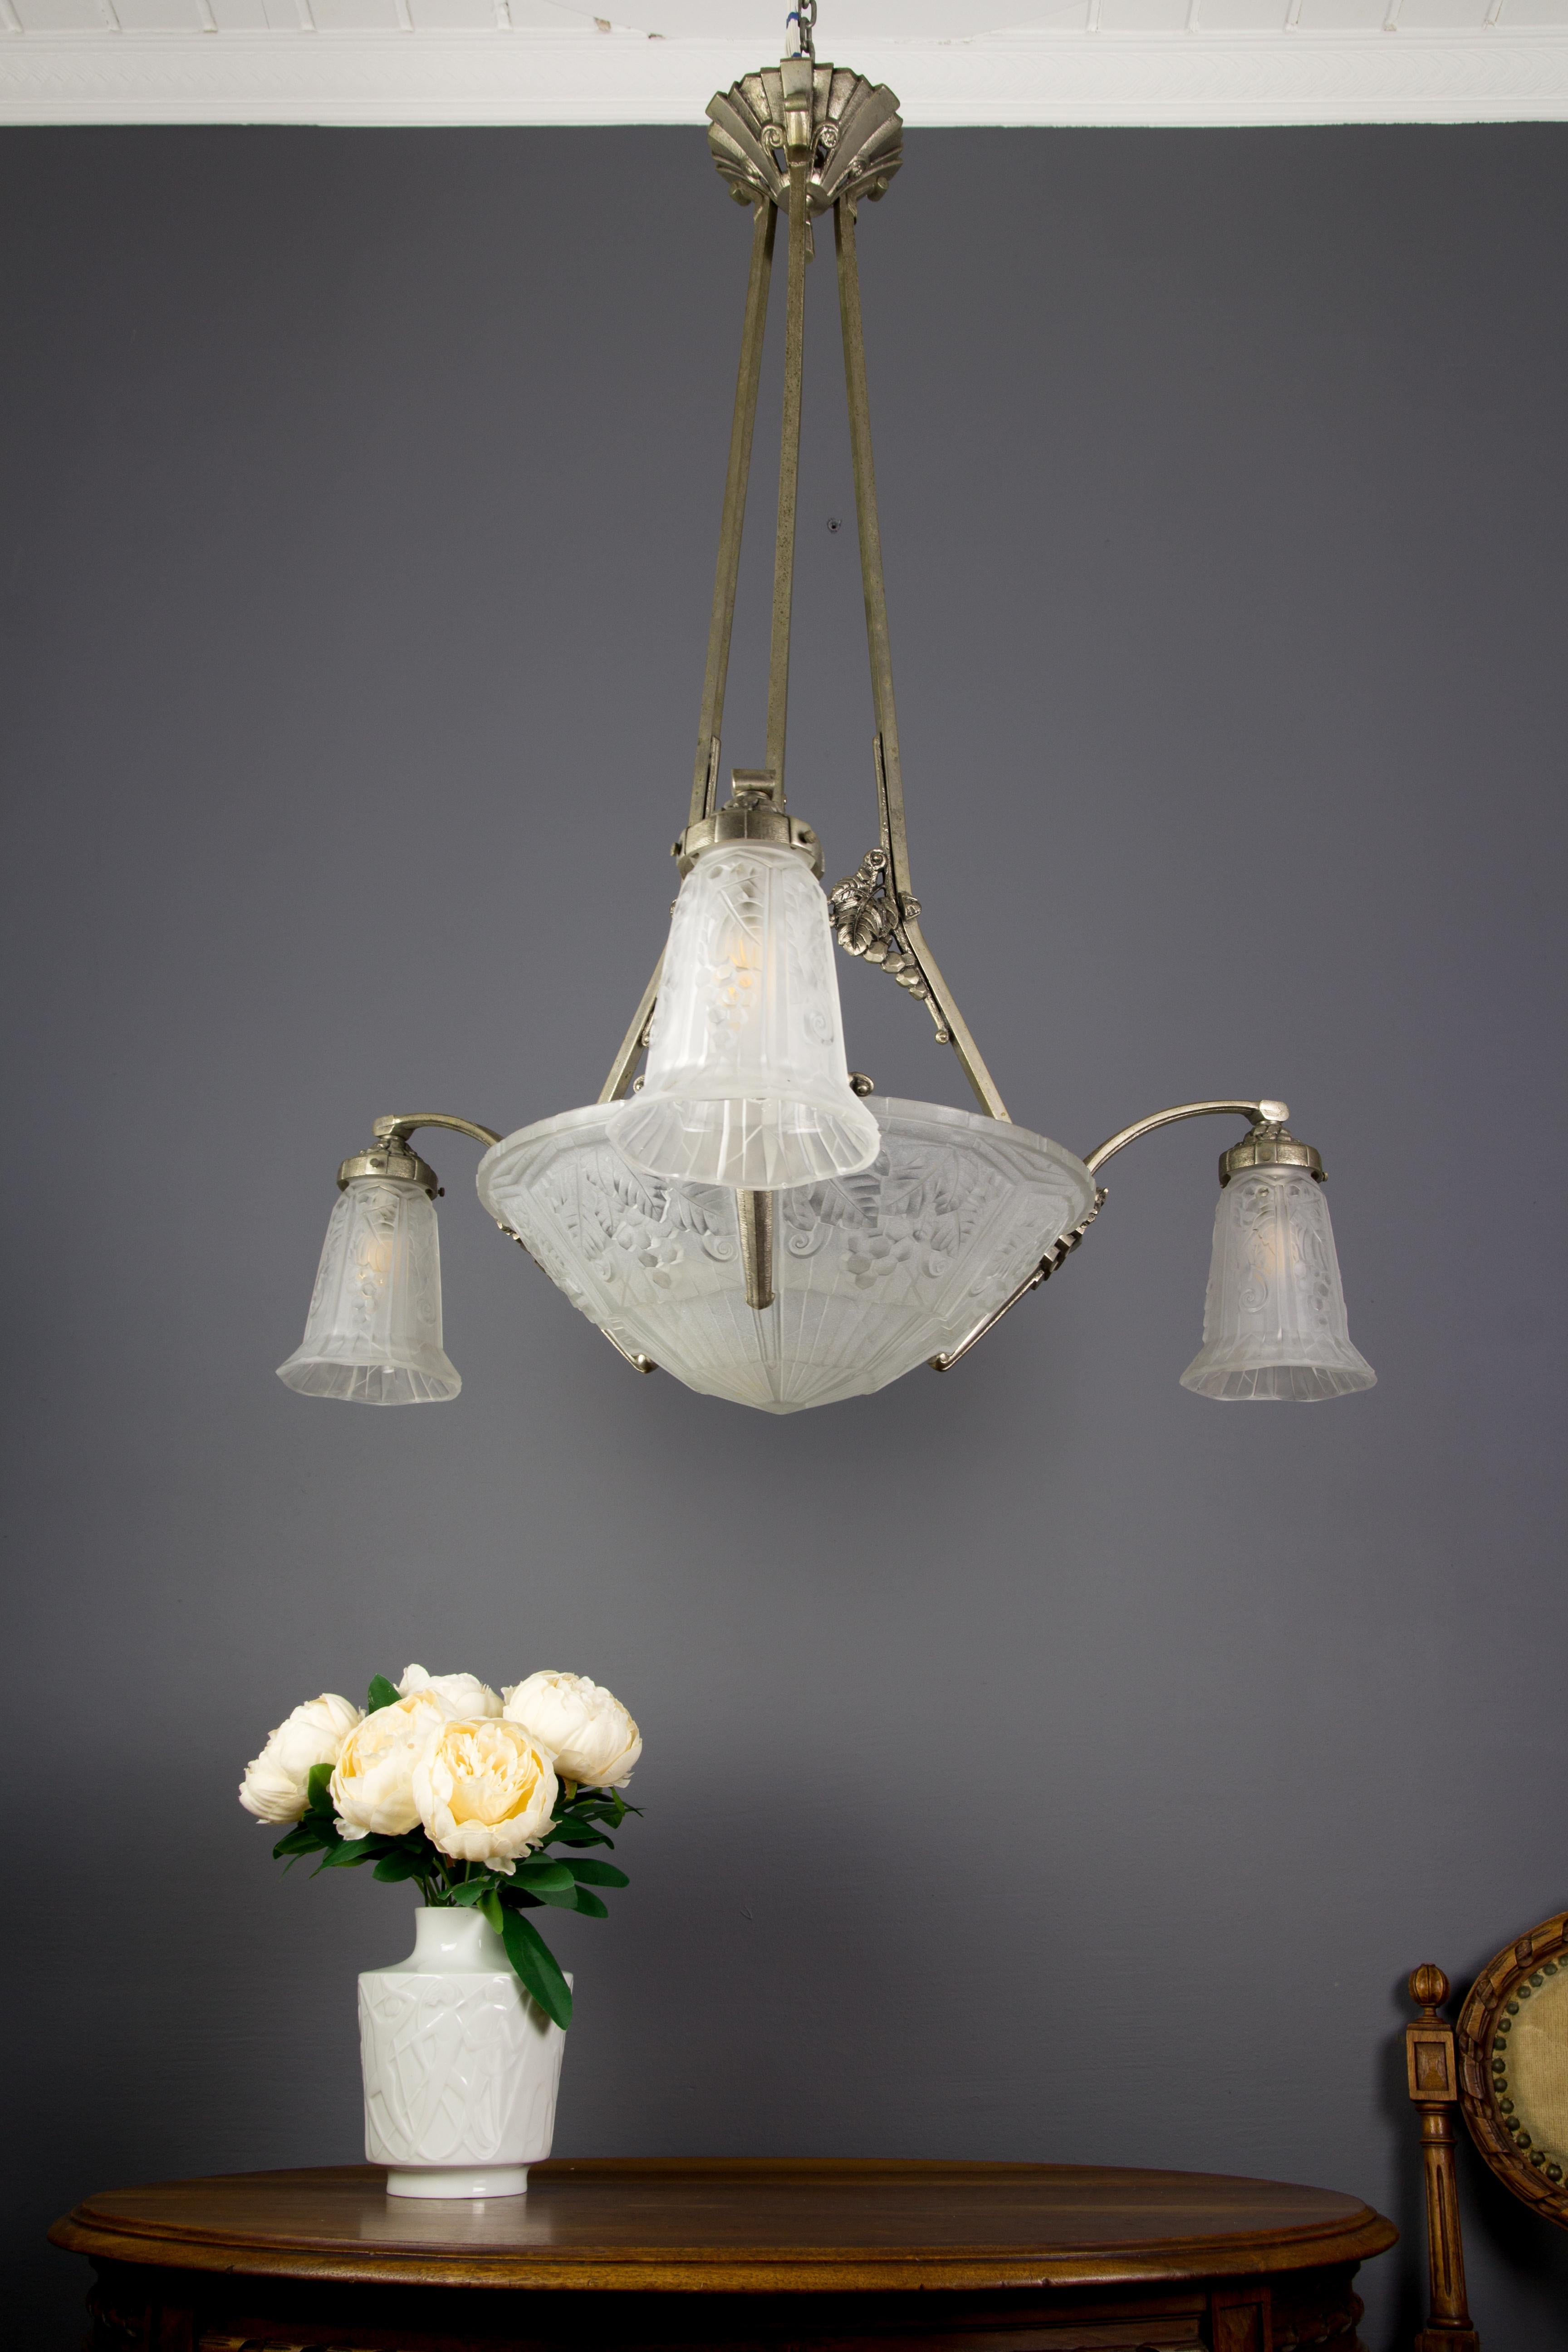 Beautiful Art Deco chandelier, made in France and signed by Pierre Maynadier. The frame of this lamp is made of nickel-plated silvered bronze. The lampshades are made of frosted glass. The central glass bowl and three tulip glass shades bear the